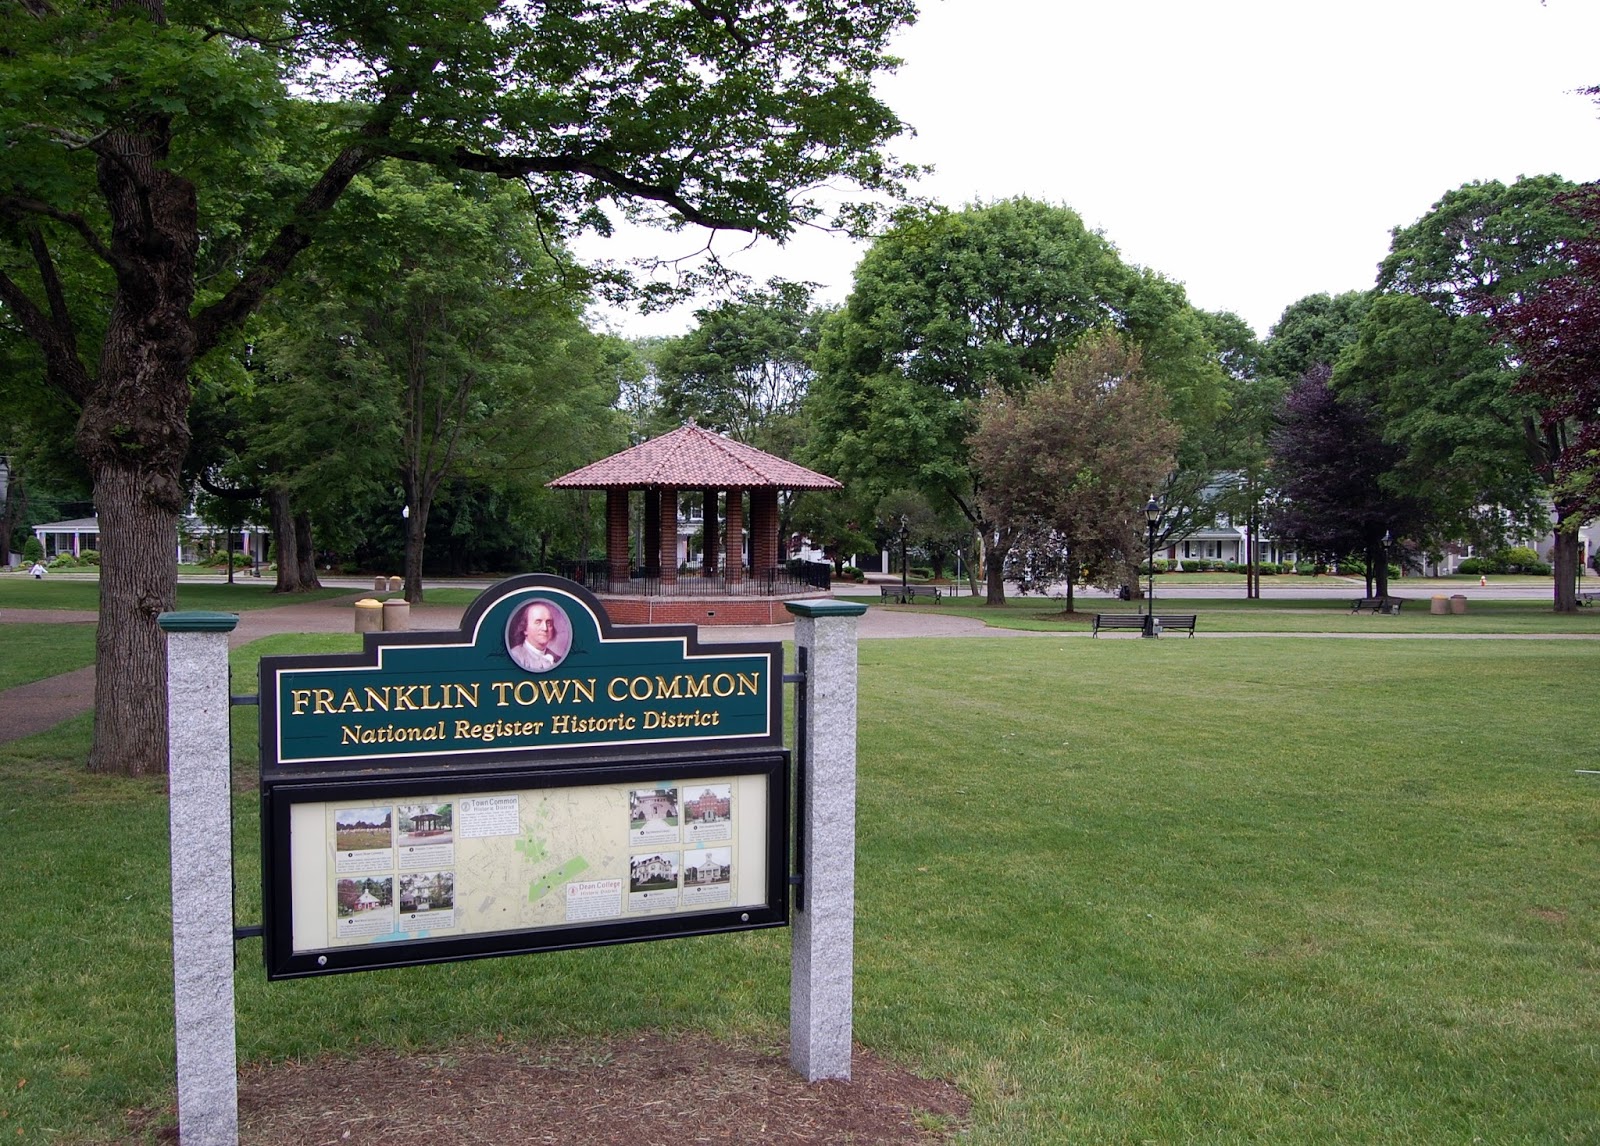 Franklin Town Common